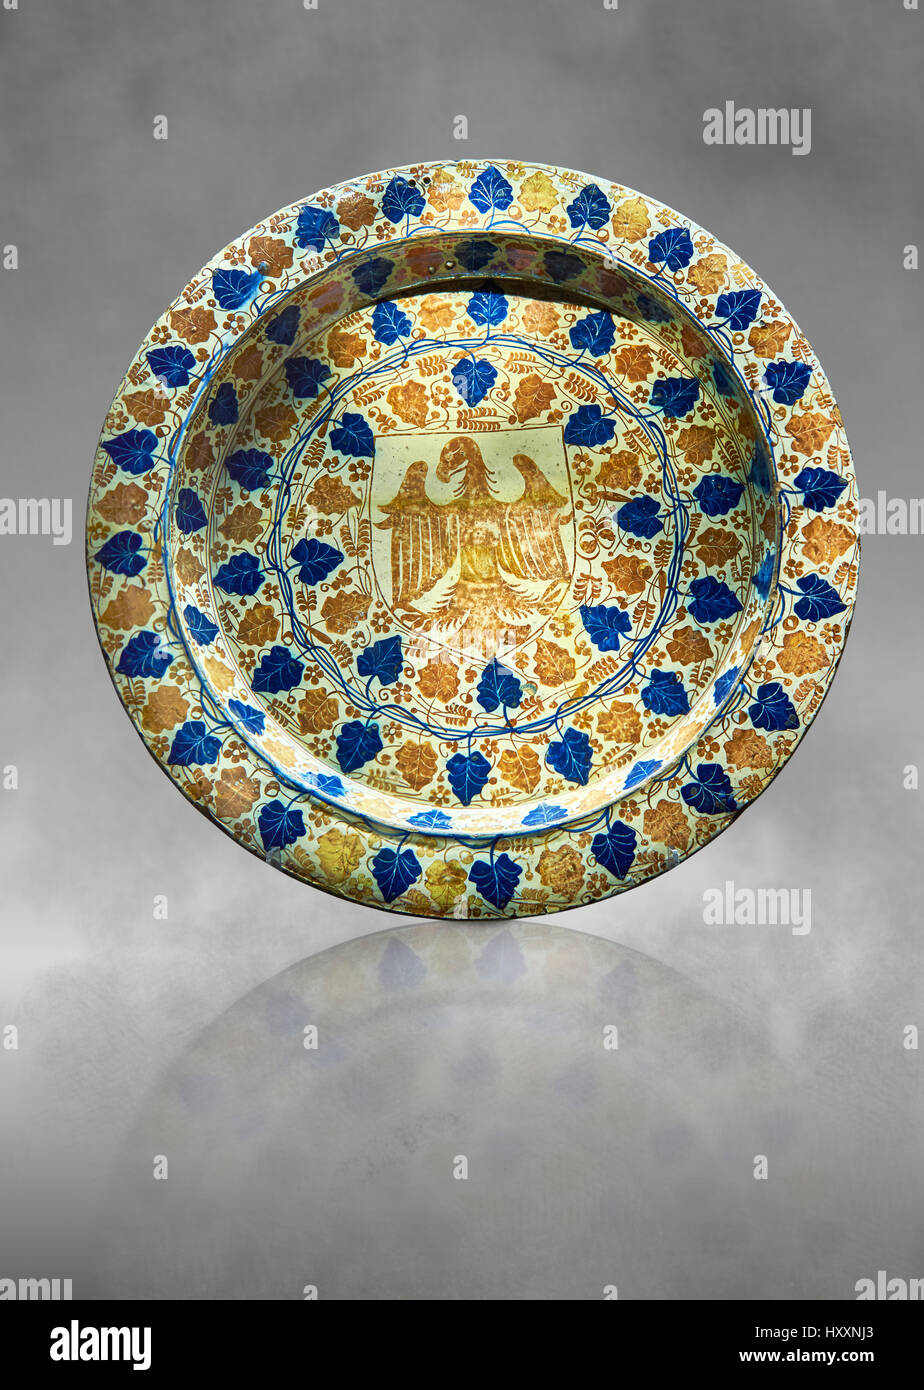 Hispano-Moresque ware dish with an eagle motif. Faience Islamic lustre ware, Manises, Al Andalus, late 14th century.  inv 1438, The Louvre Museum Stock Photo